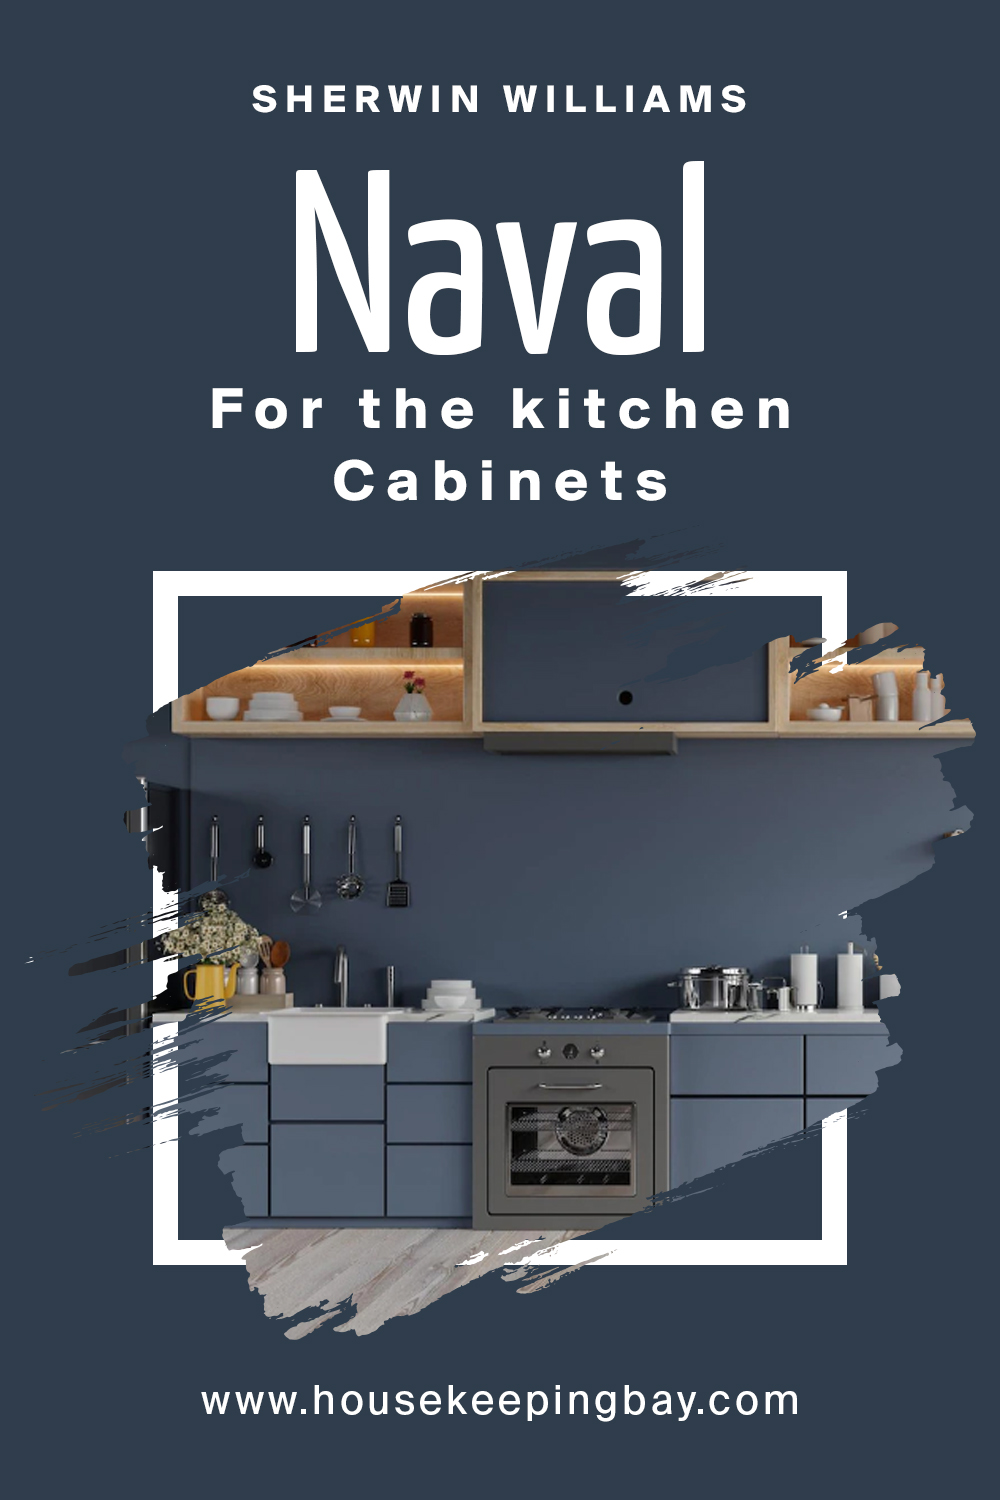 Sherwin Williams. Naval For the kitchen Cabinets